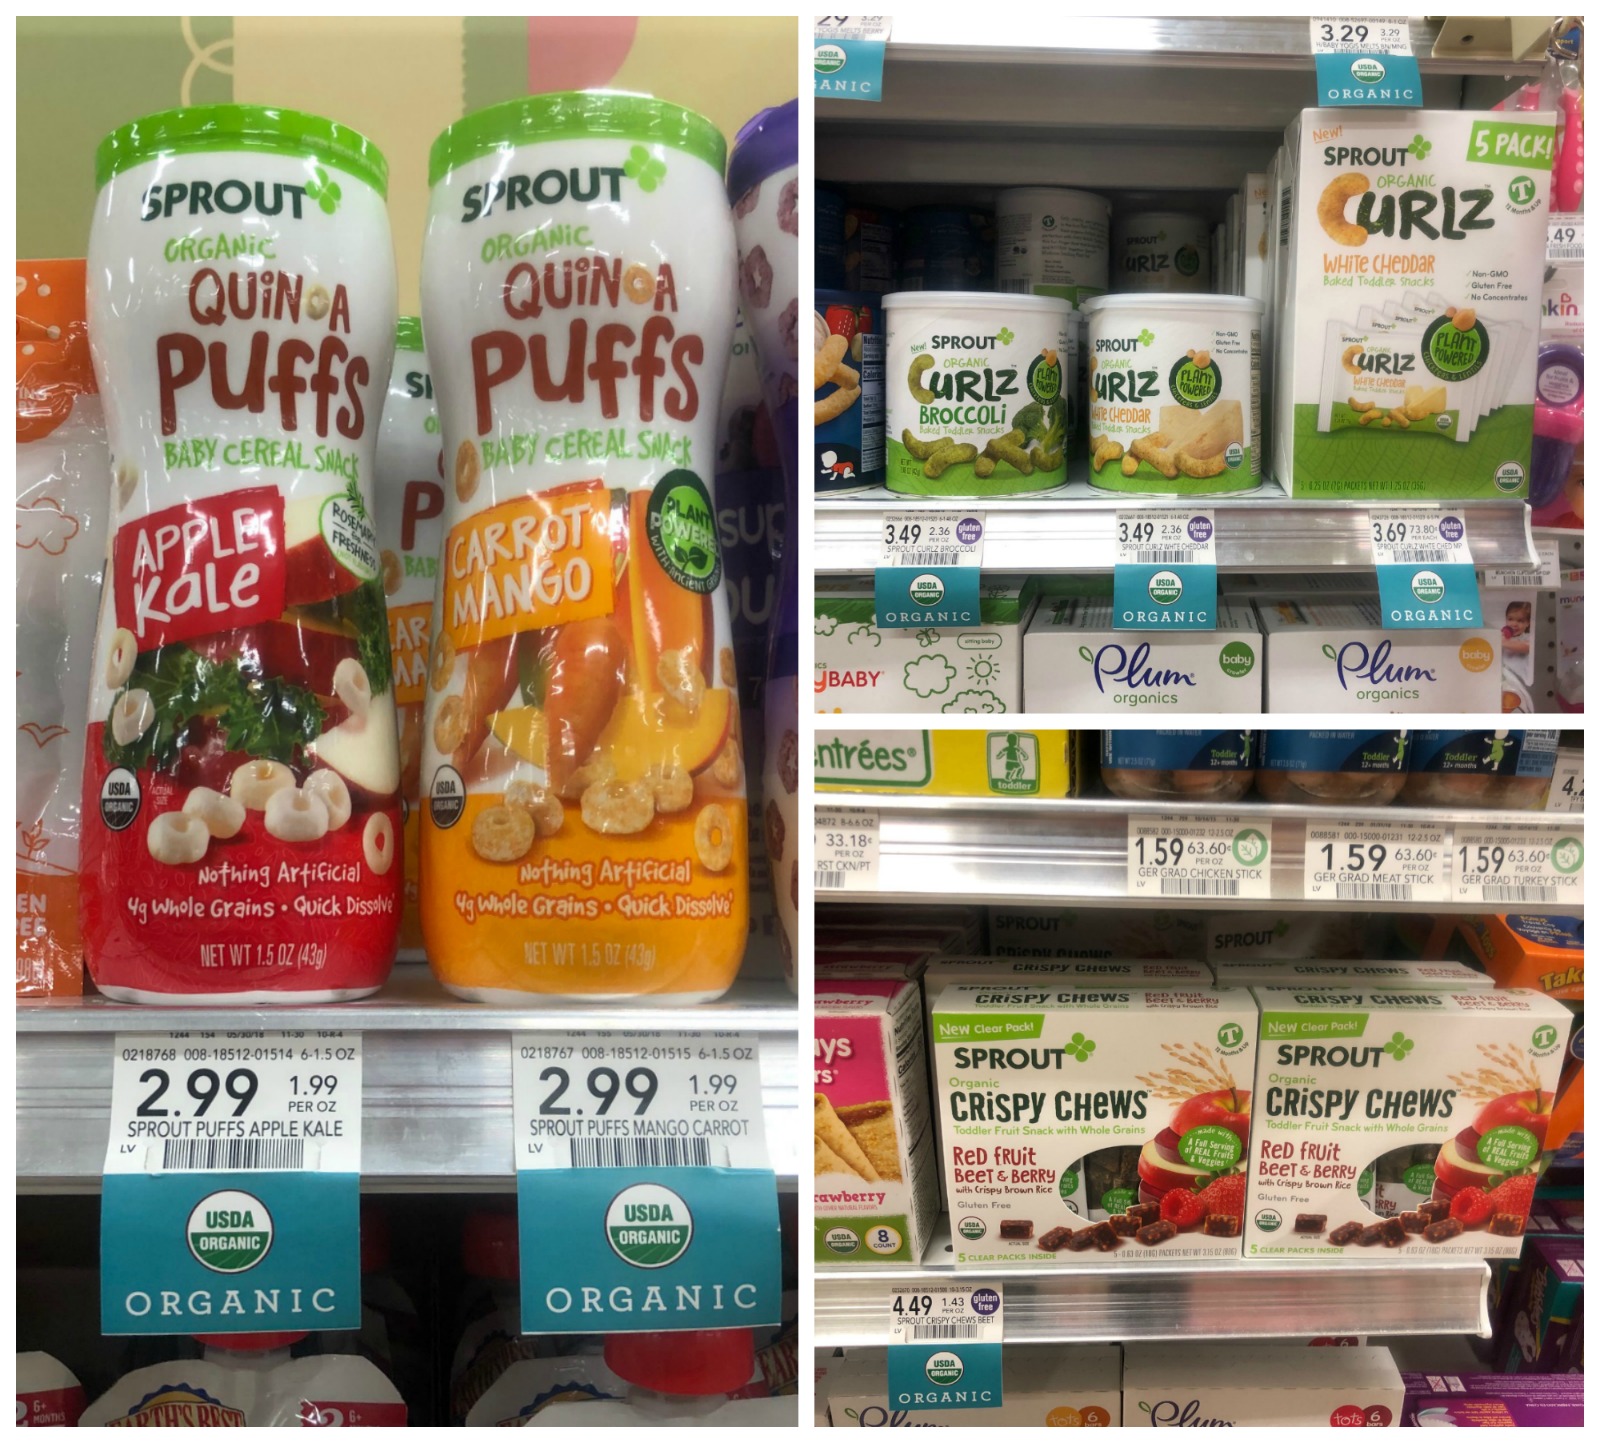 PROTEIN POWERED POUCHES FOR BABIES on I Heart Publix 1